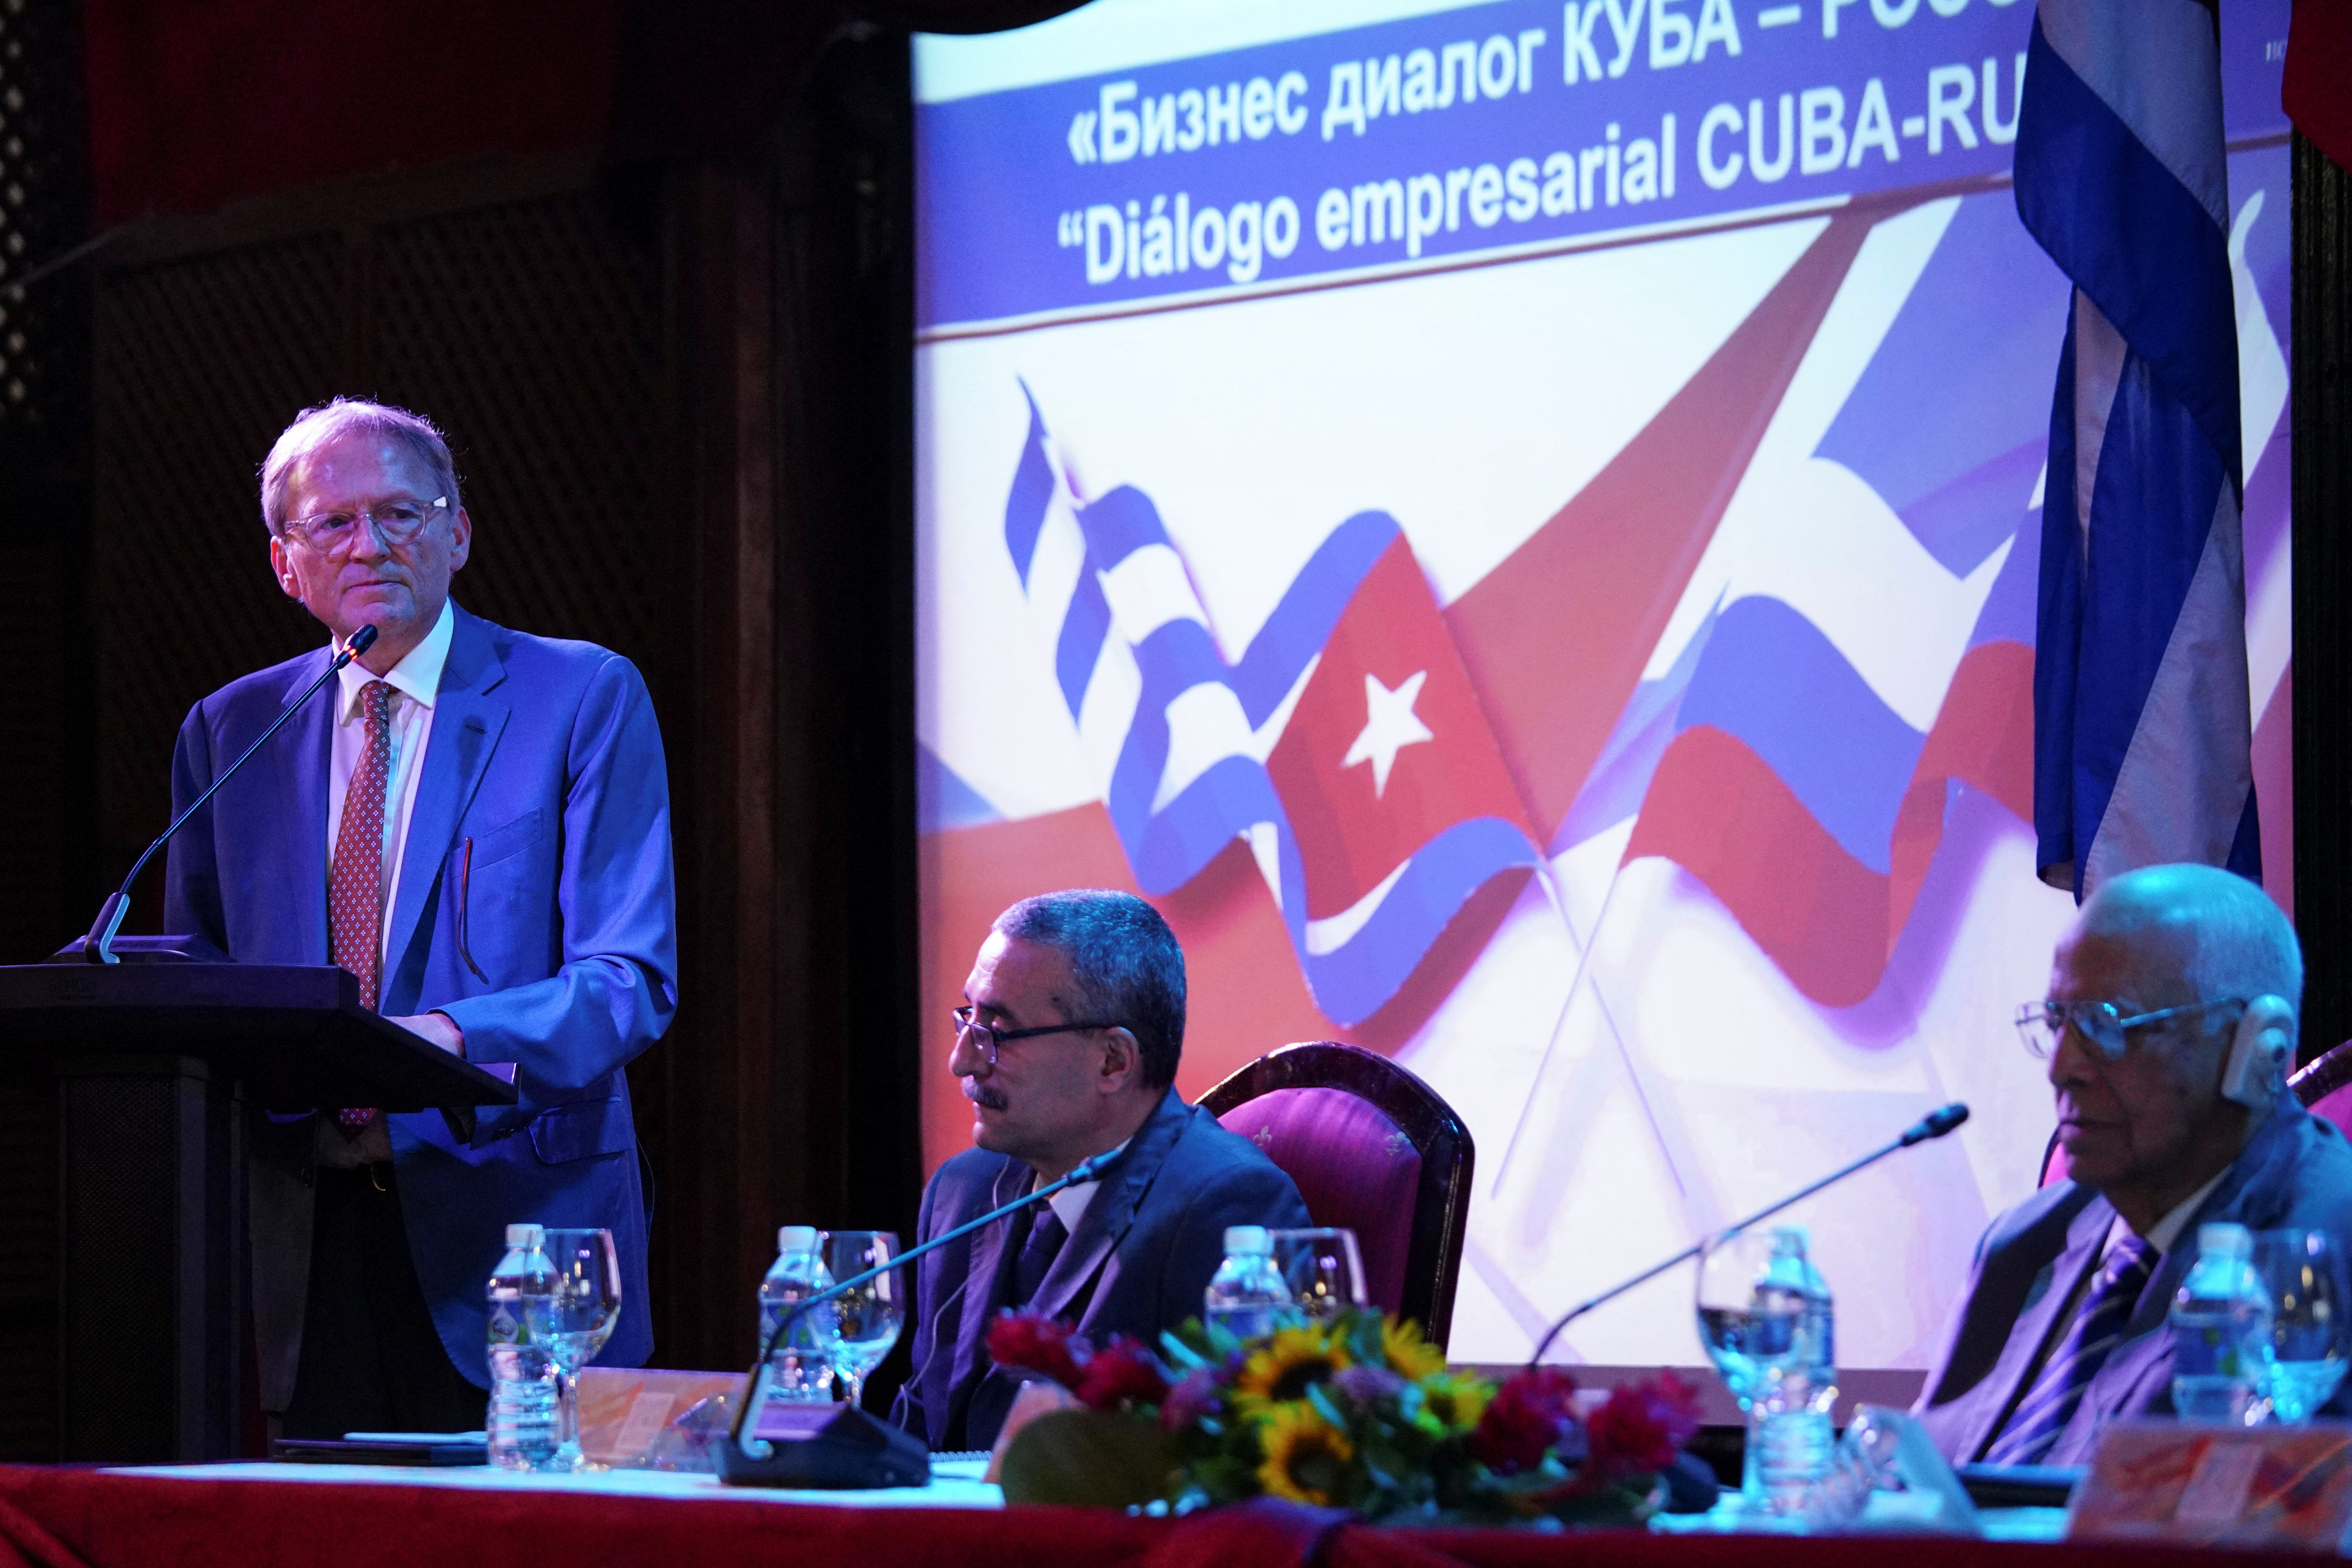 Boris Titov, head of the Russian delegation of the Cuban-Russian Business Committee gives a speech in Havana